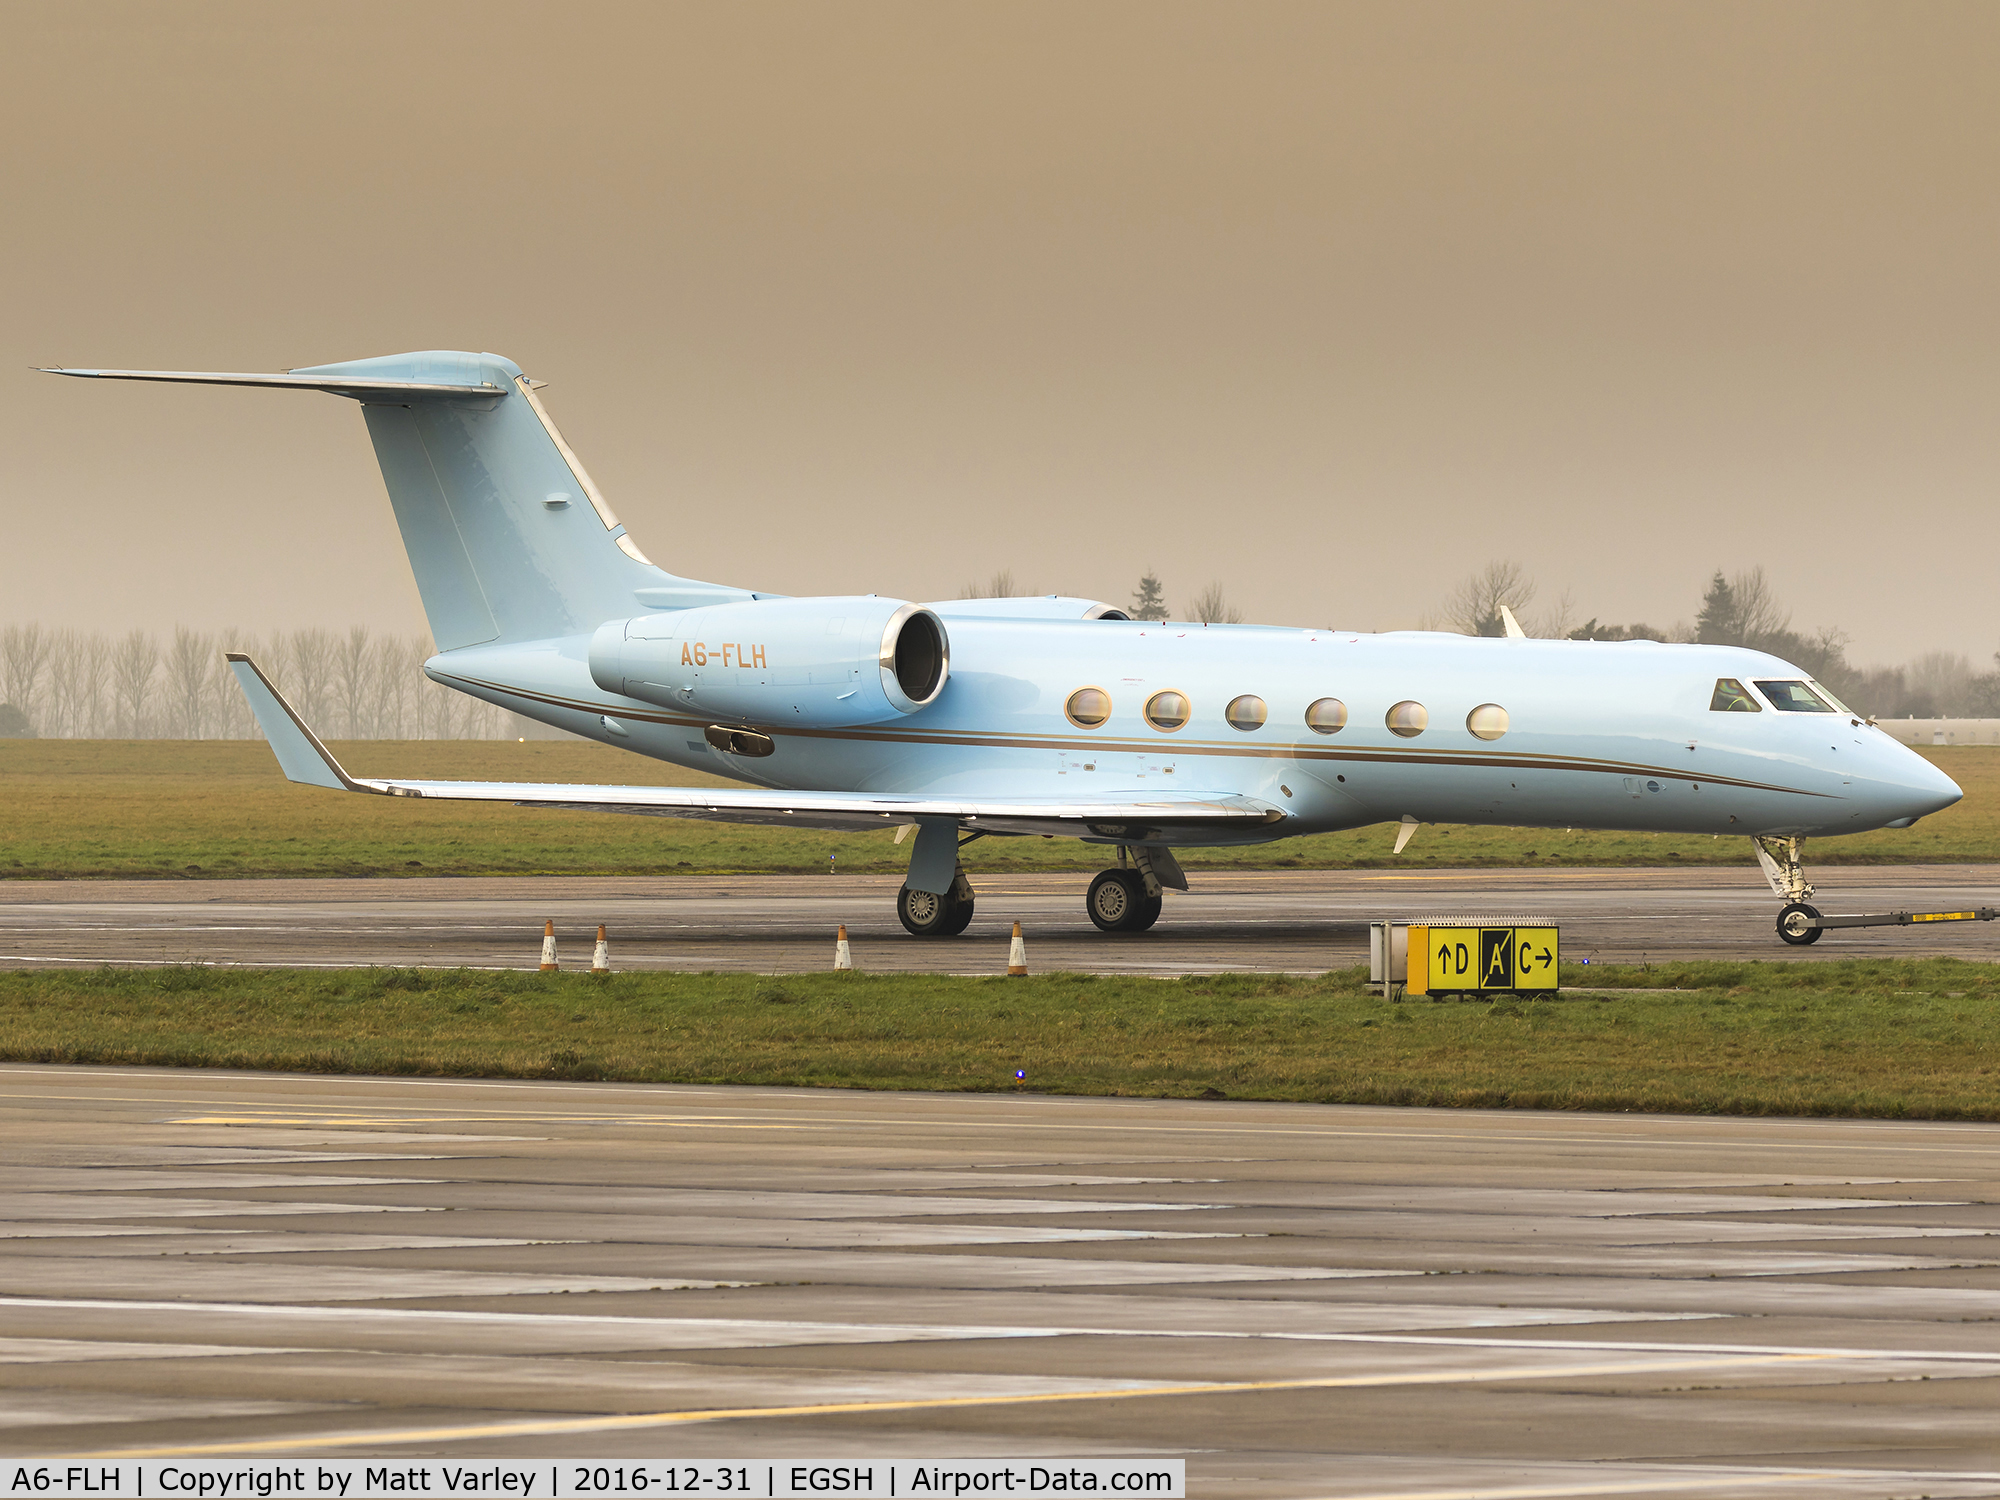 A6-FLH, 2009 Gulfstream Aerospace GIV-X (G450) C/N 4155, Being positioned onto st7 @ NWI after performing engine runs , this aircraft is fresh out of the paint shop having received this new light blue colour scheme....